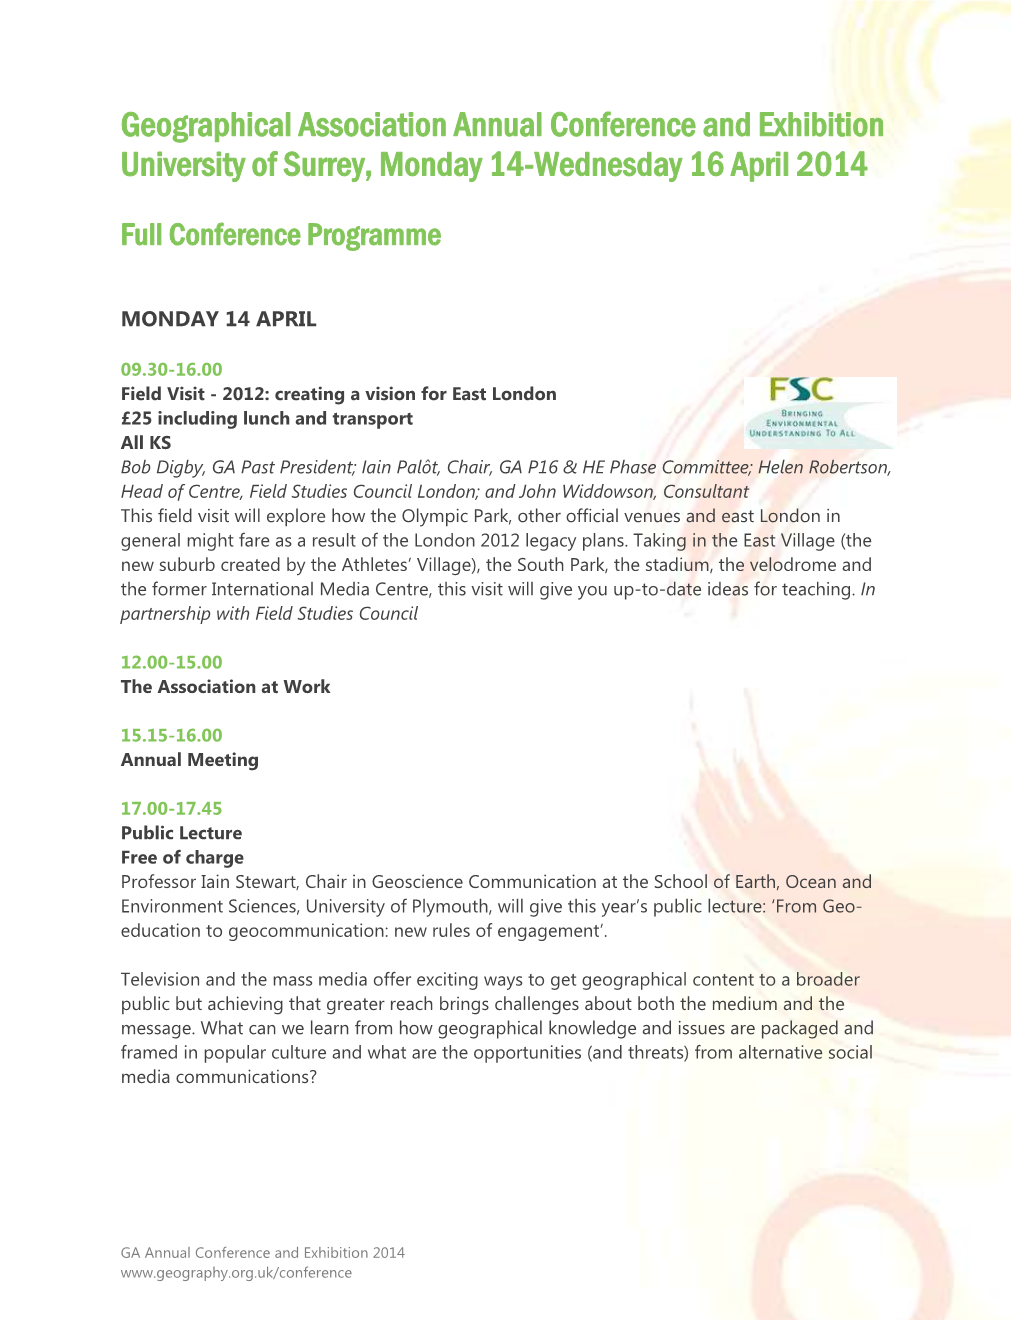 Geographical Association Annual Conference and Exhibition University of Surrey, Monday 14-Wednesday 16 April 2014